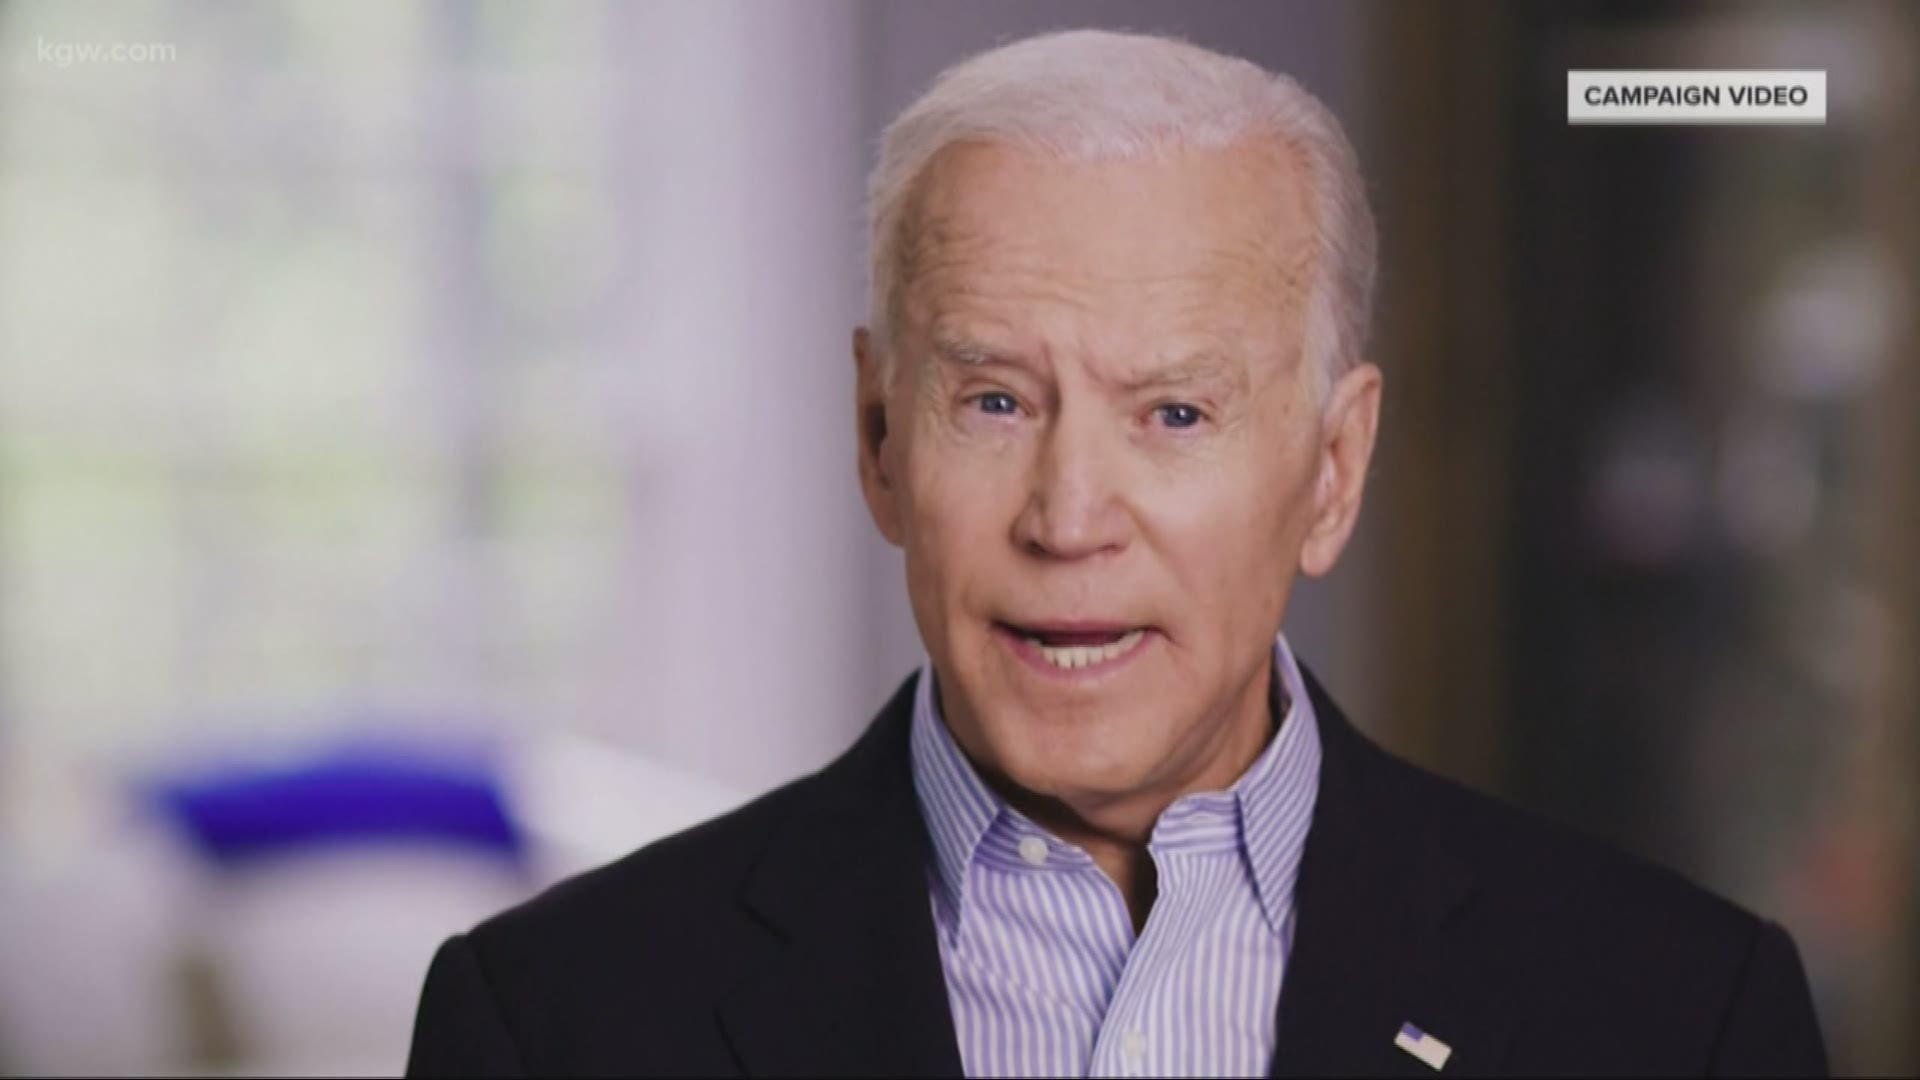 With Joe Biden officially in the presidential race, do Oregon Democrats favor him over Bernie Sanders? Pacific University political scientist Jim Moore says that with so many others in the race, anything is possible. Biden, Moore says, is unique in 2019 in that he is a moderate and Sanders has the same 2016 platform.